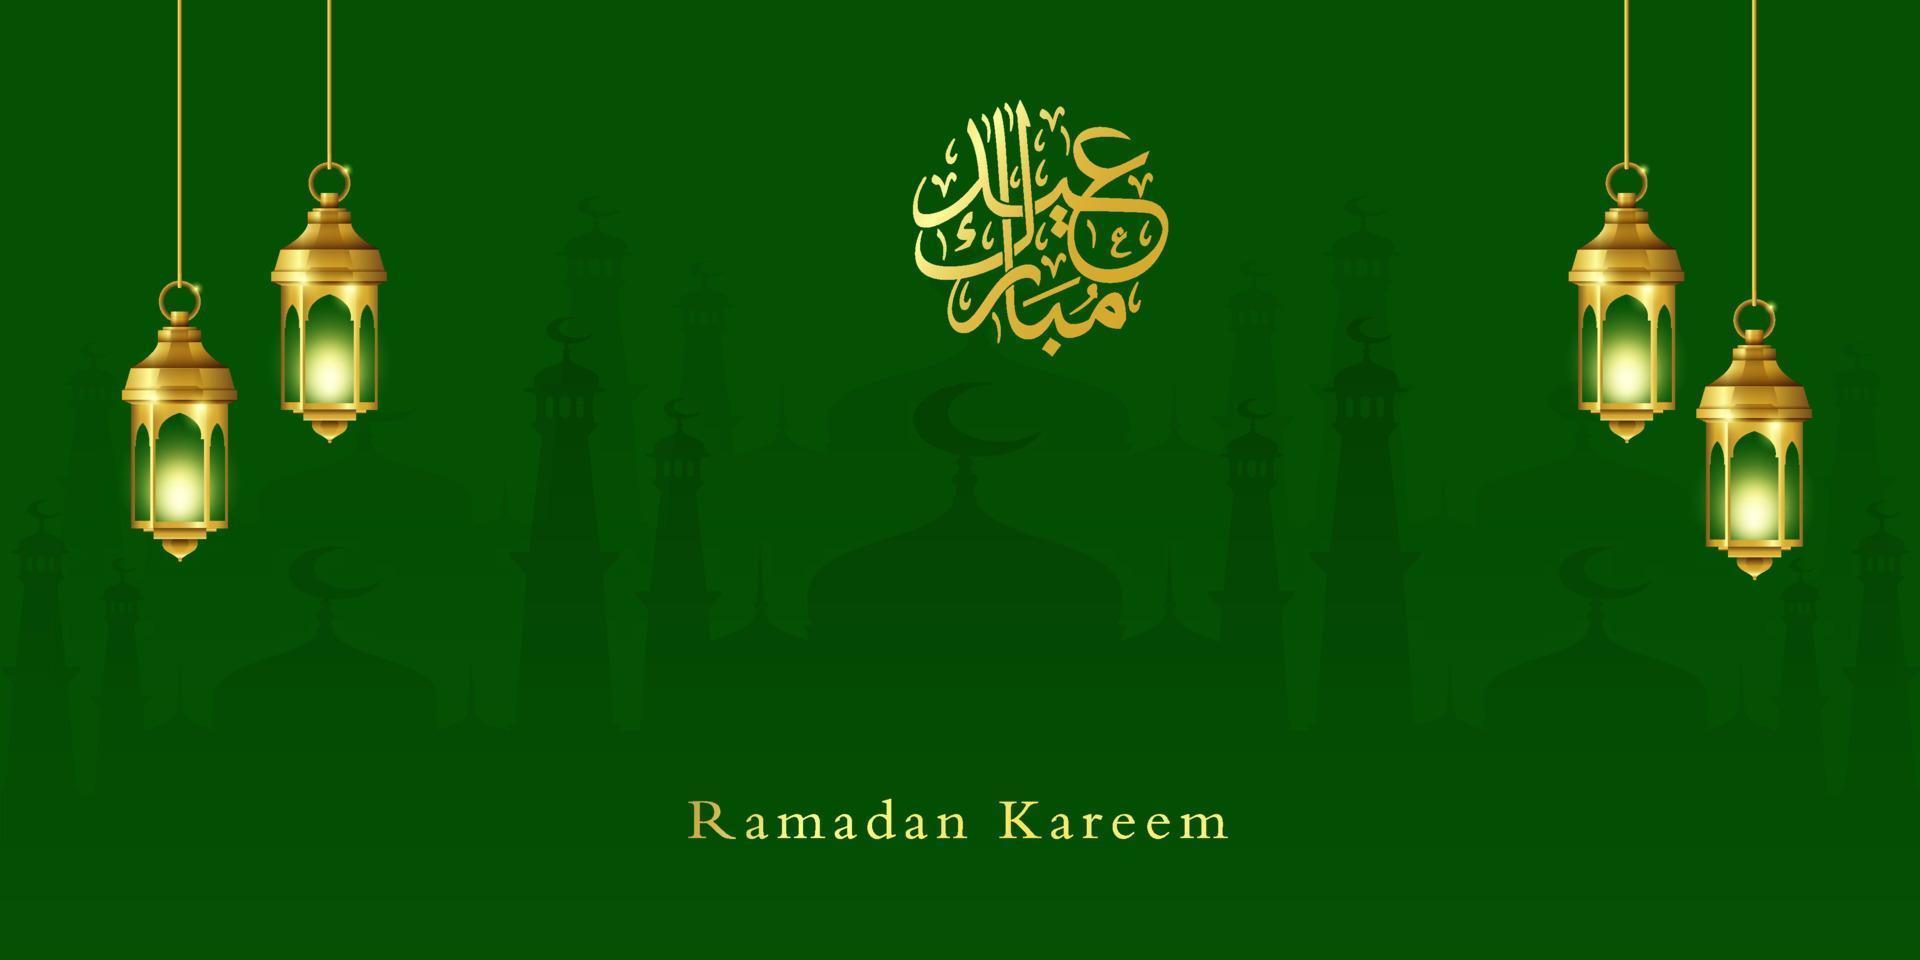 Islamic background or banner with hanging lanterns vector